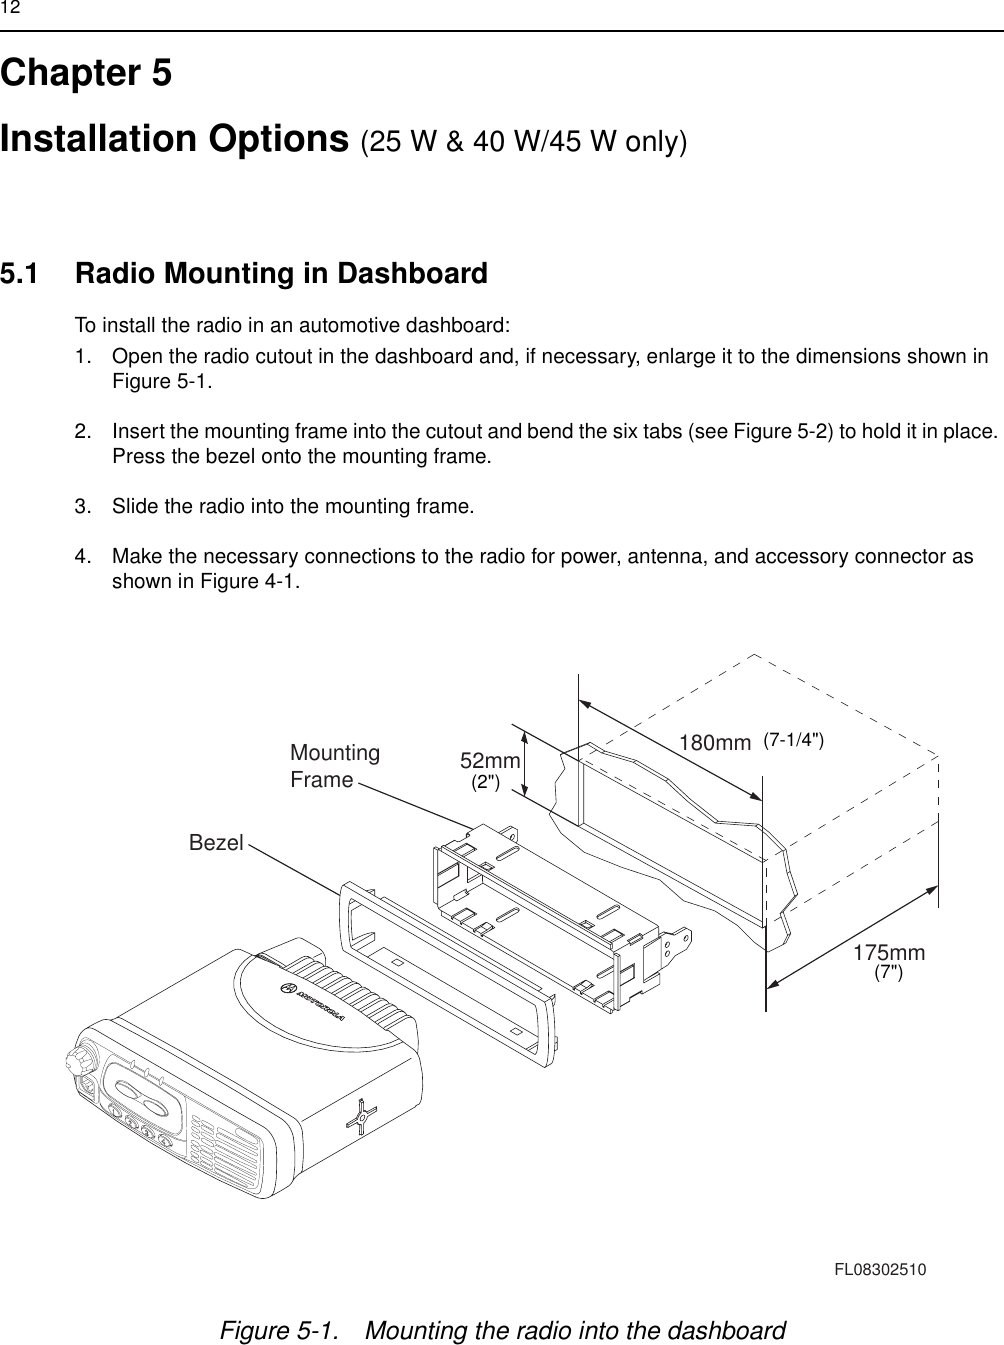 12Chapter 5Installation Options (25 W &amp; 40 W/45 W only)5.1 Radio Mounting in DashboardTo install the radio in an automotive dashboard:1. Open the radio cutout in the dashboard and, if necessary, enlarge it to the dimensions shown in Figure 5-1.2. Insert the mounting frame into the cutout and bend the six tabs (see Figure 5-2) to hold it in place. Press the bezel onto the mounting frame. 3. Slide the radio into the mounting frame.4. Make the necessary connections to the radio for power, antenna, and accessory connector as shown in Figure 4-1.Figure 5-1. Mounting the radio into the dashboard BezelMountingFrame175mm180mm52mmFL08302510(7-1/4&quot;)(7&quot;)(2&quot;)